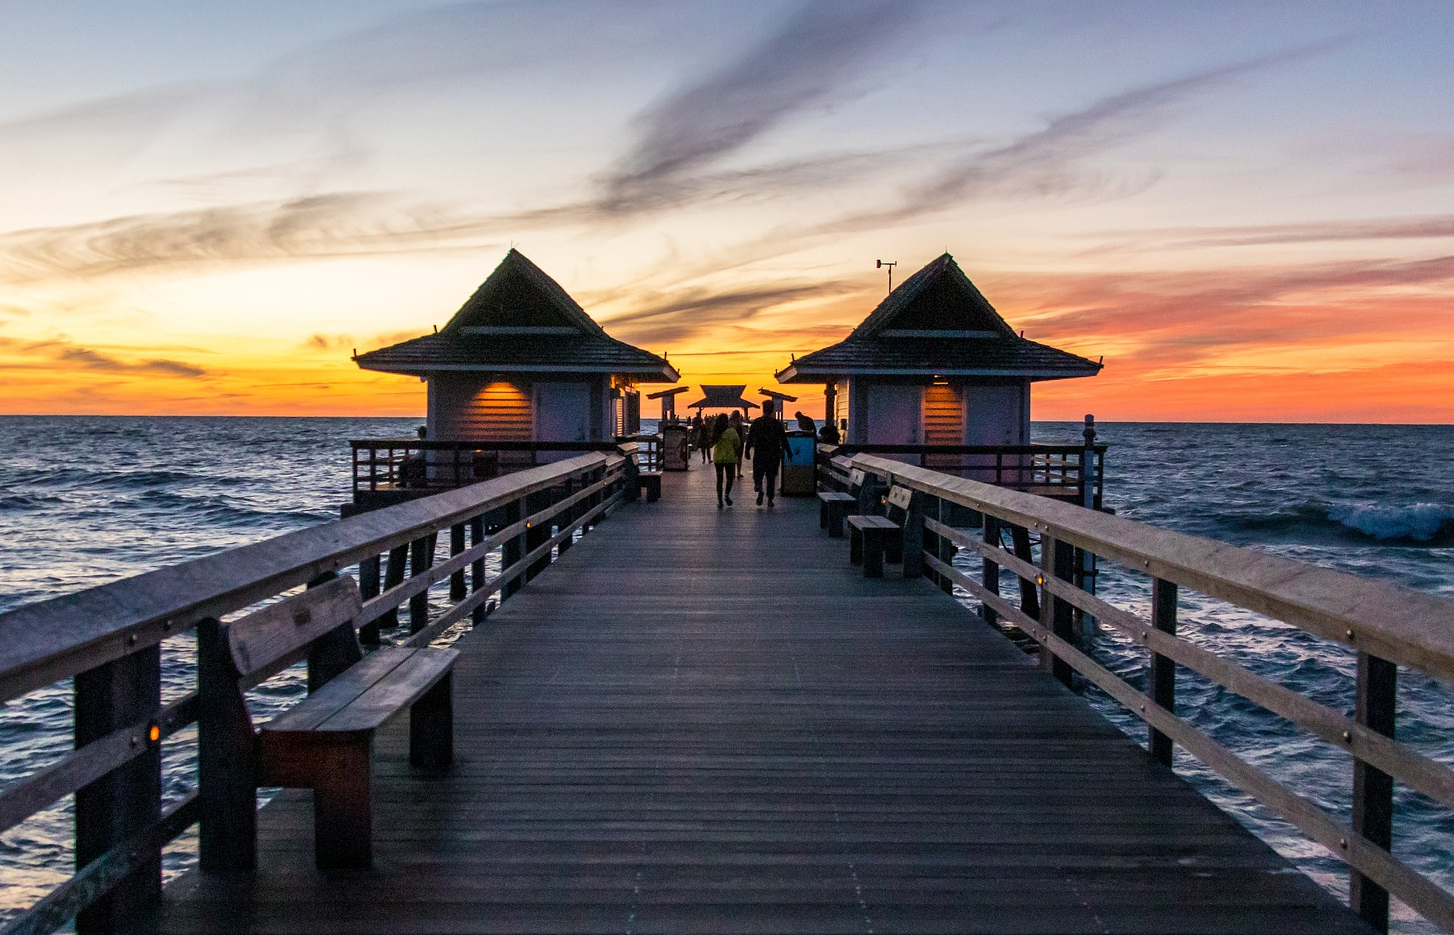 From Pier to Pier  Naples Florida image